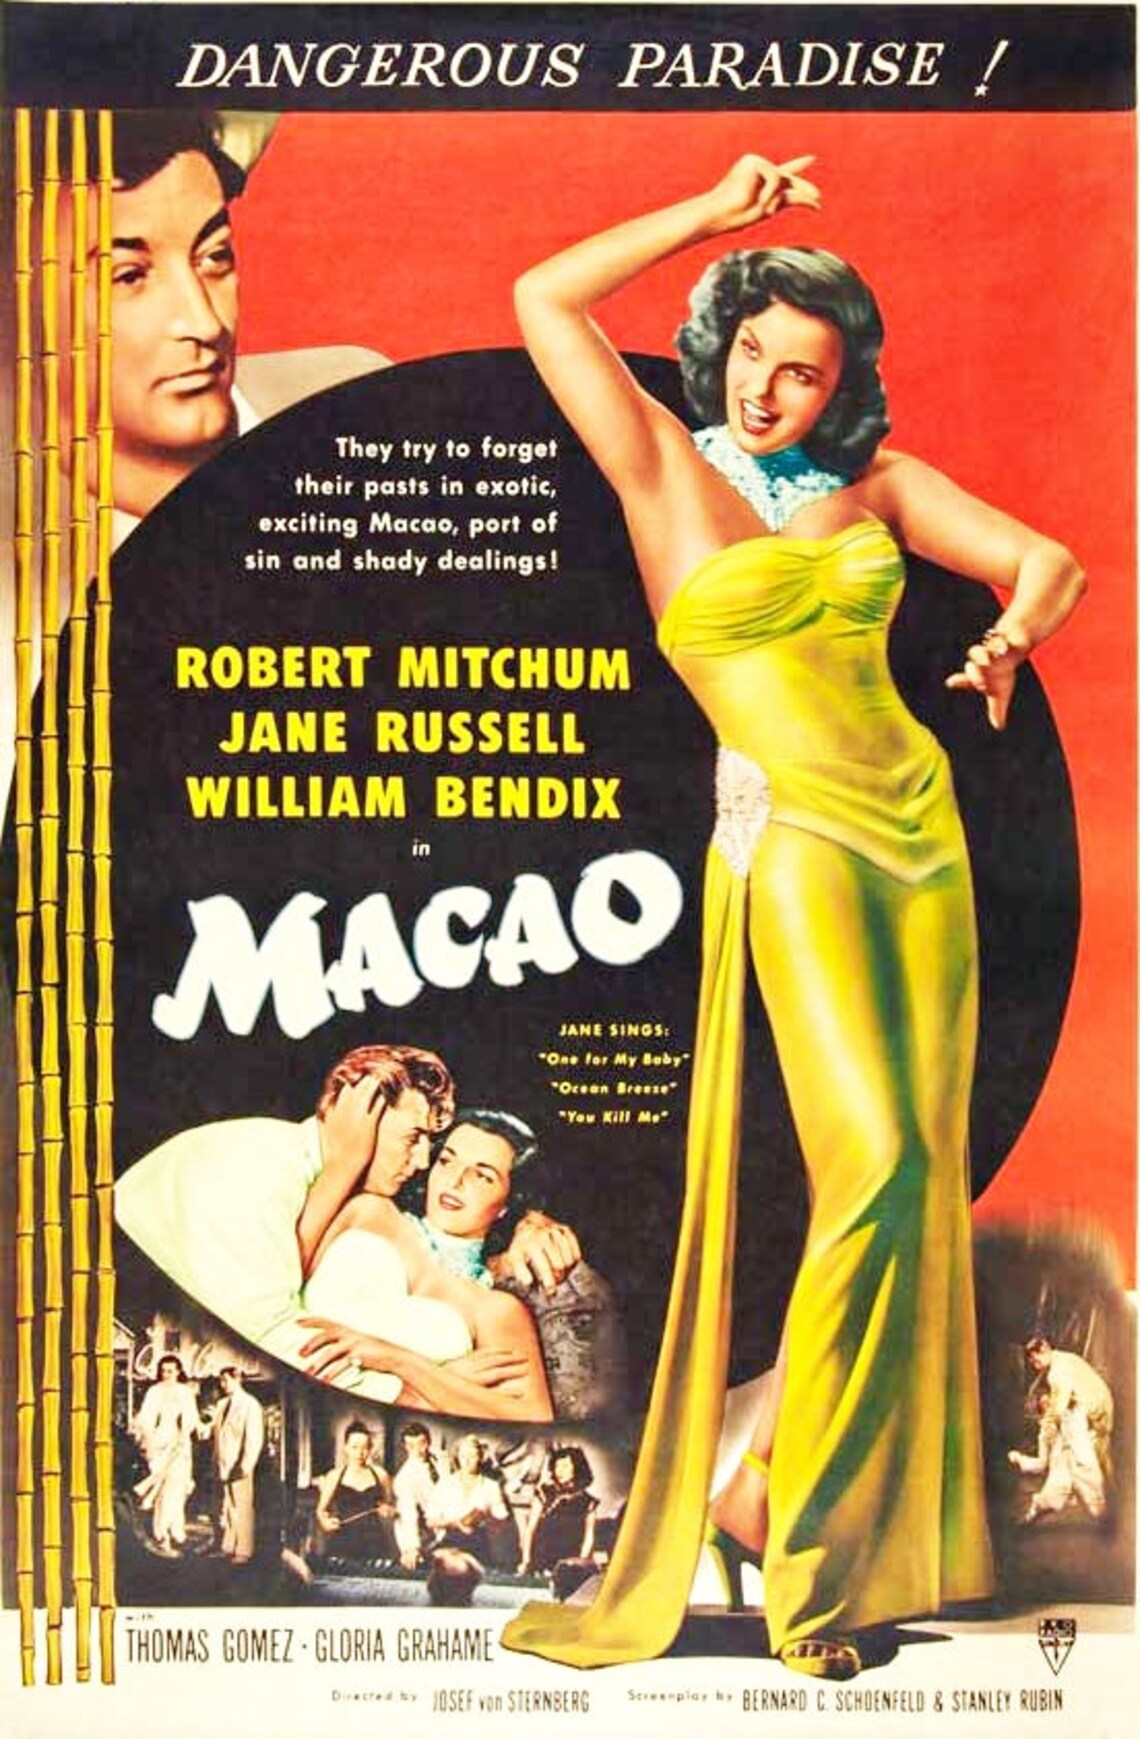 Copy of 1952 Film Poster Macao. Starring Robert Mitchim, Jane Russell and William Bendix. An A4 Size Poster image 1